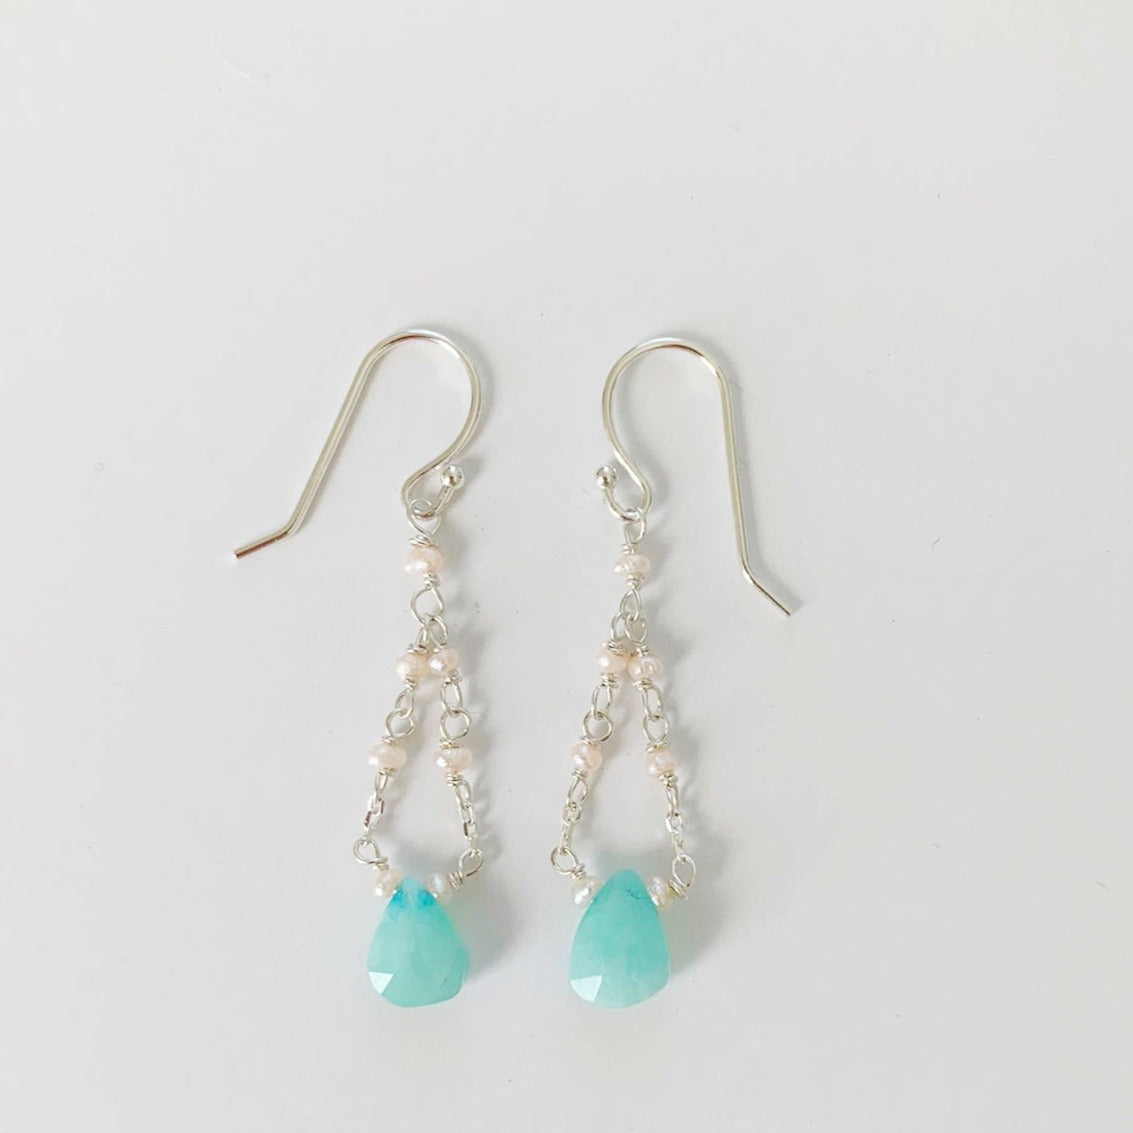 the island air earrings by mermaids and madeleines are created with amazonite teardrop stones at the bottom of the earring with sterling silver chain mixed with pearls looping back up to the ear hook. this pair is photographed on a white background